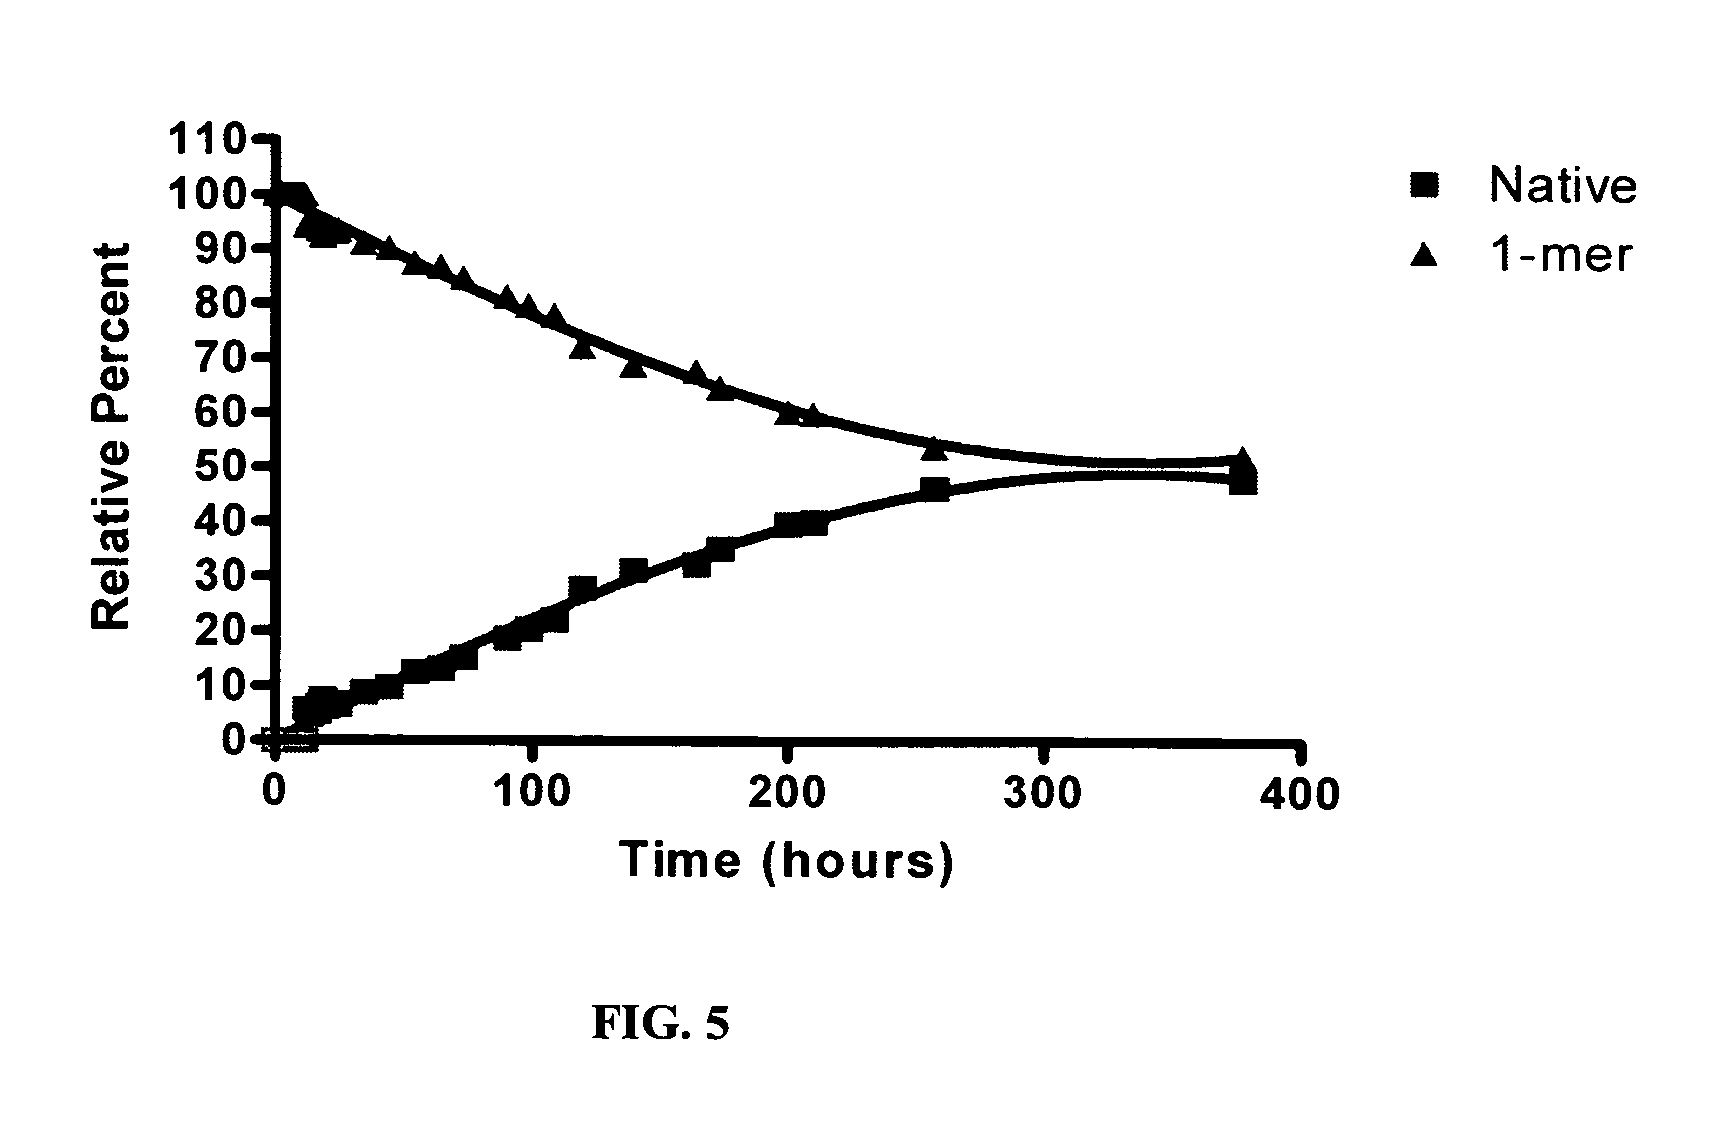 Polymer-based compositions and conjugates of HIV entry inhibitors